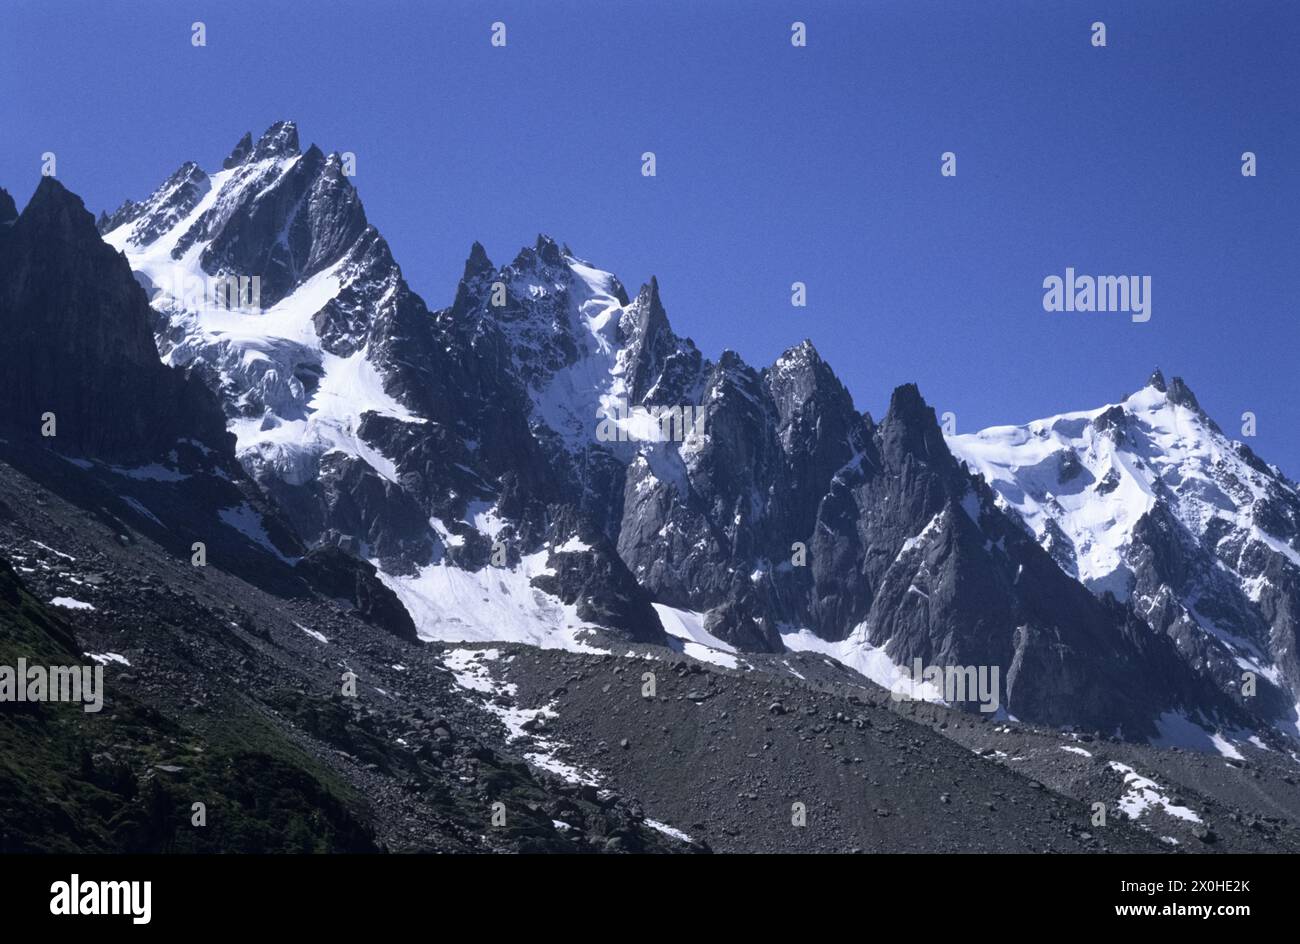 The Aiguilles de Chamonix with Aiguilles du Midi from the hiking trail from Plan d'Aiguille to Montenvers. [automated translation] Stock Photo